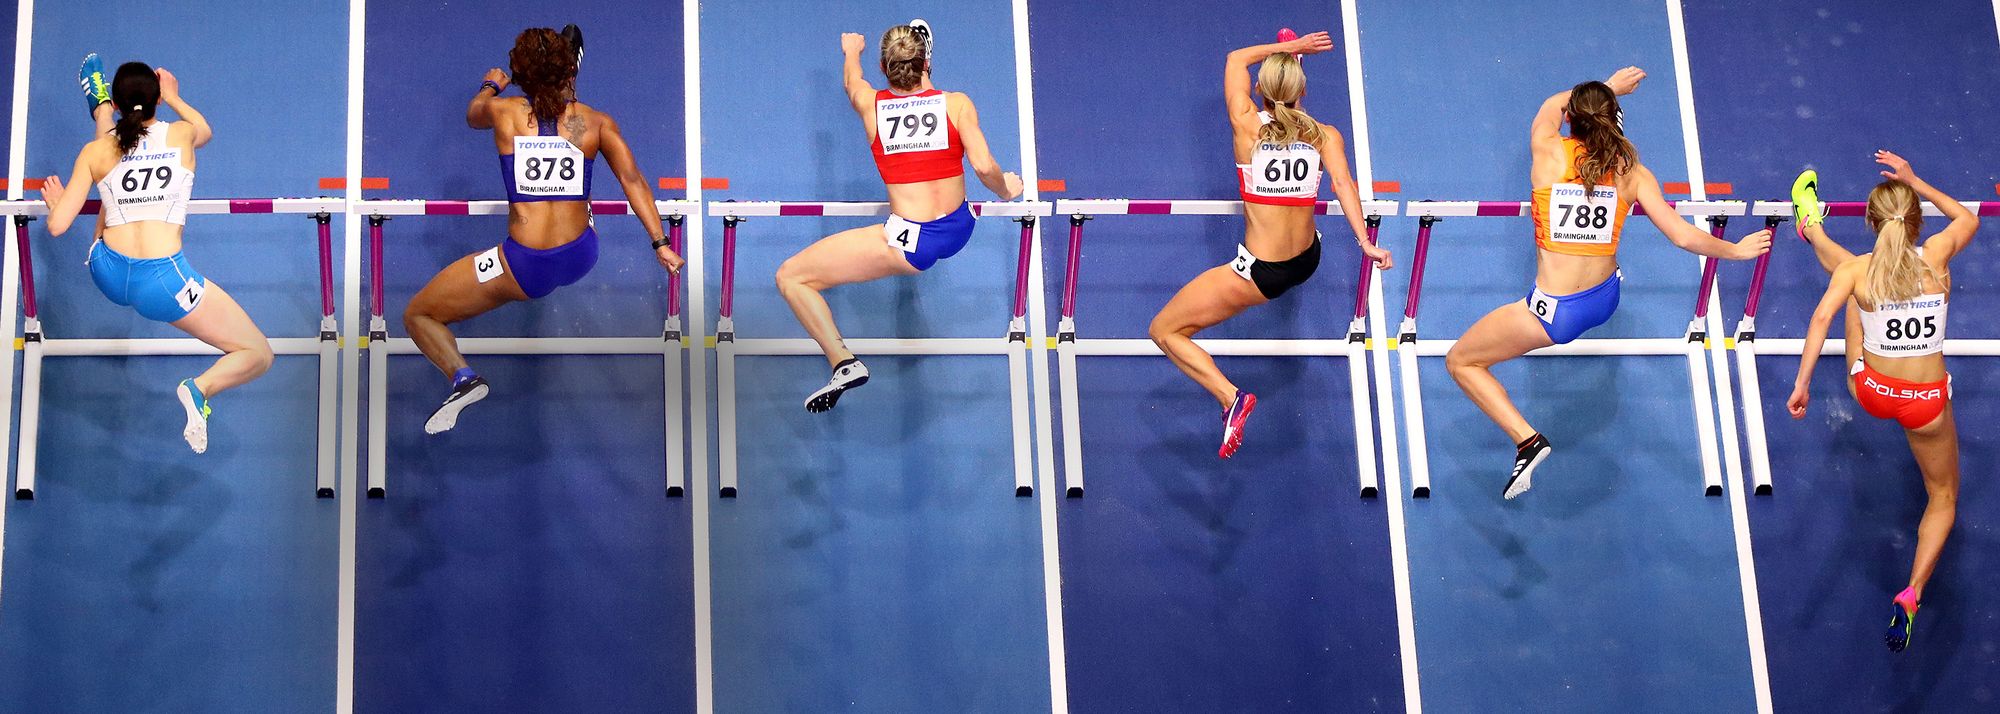 Athletes competing in individual events can qualify in a number of ways